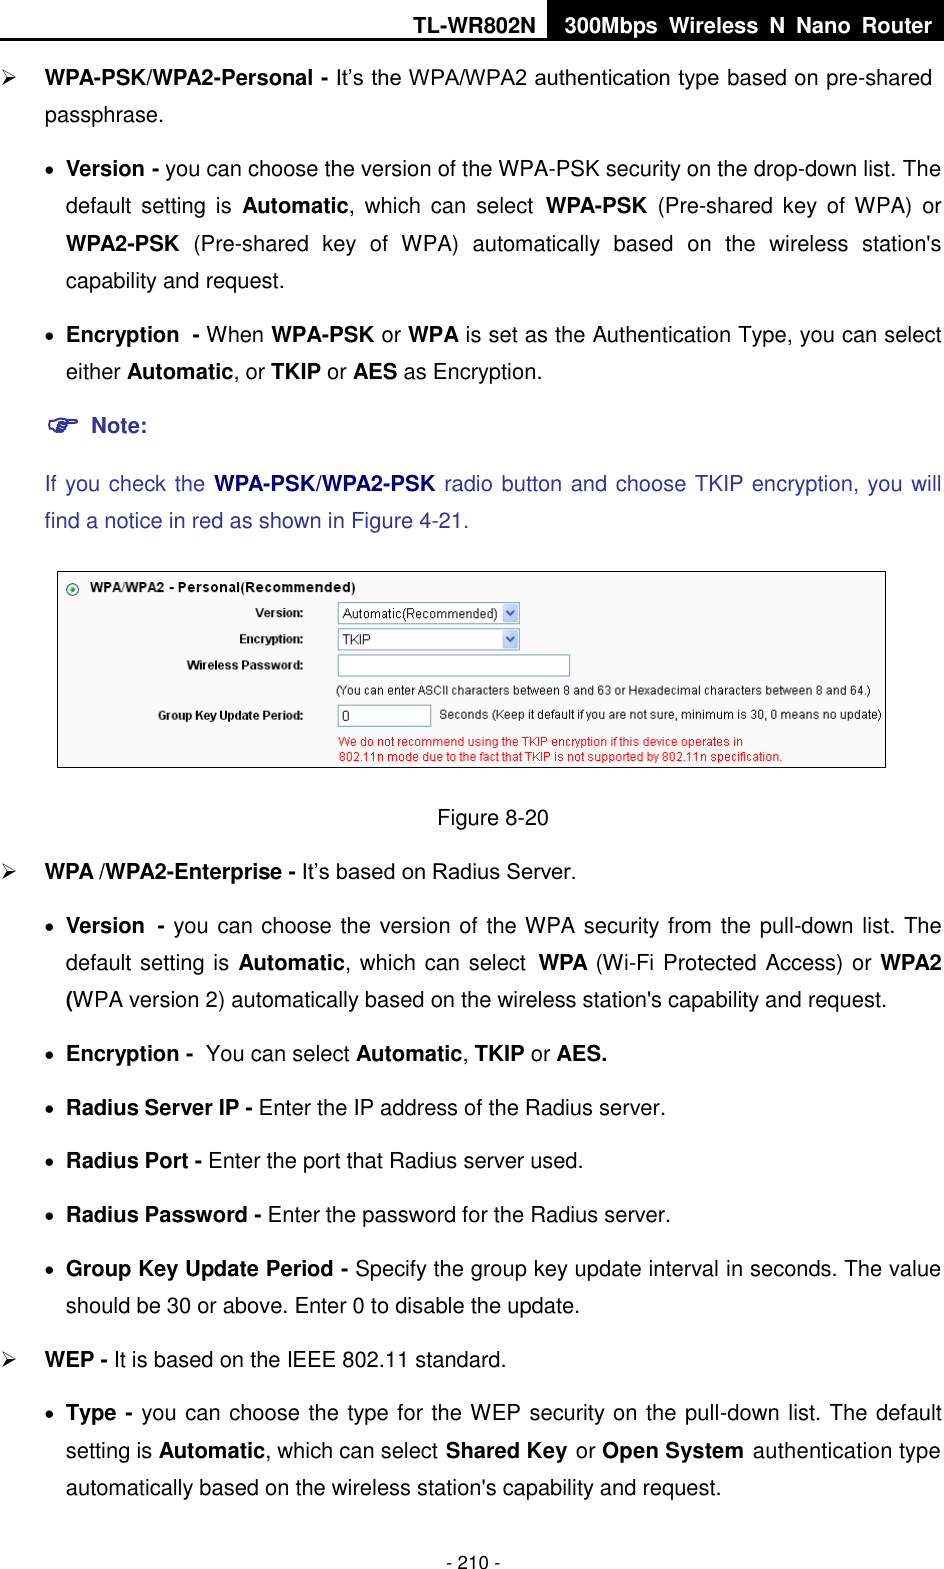 TL-WR802N 300Mbps  Wireless  N  Nano  Router  - 210 -  WPA-PSK/WPA2-Personal - It’s the WPA/WPA2 authentication type based on pre-shared passphrase.    Version - you can choose the version of the WPA-PSK security on the drop-down list. The default  setting  is  Automatic,  which  can  select WPA-PSK  (Pre-shared key  of  WPA)  or WPA2-PSK  (Pre-shared  key  of  WPA)  automatically  based  on  the  wireless  station&apos;s capability and request.  Encryption - When WPA-PSK or WPA is set as the Authentication Type, you can select either Automatic, or TKIP or AES as Encryption.  Note:   If you check the WPA-PSK/WPA2-PSK radio button and choose TKIP encryption, you will find a notice in red as shown in Figure 4-21.  Figure 8-20  WPA /WPA2-Enterprise - It’s based on Radius Server.  Version - you can choose the version of the WPA security from the pull-down list. The default setting is Automatic, which can select WPA (Wi-Fi Protected Access) or WPA2 (WPA version 2) automatically based on the wireless station&apos;s capability and request.  Encryption - You can select Automatic, TKIP or AES.  Radius Server IP - Enter the IP address of the Radius server.  Radius Port - Enter the port that Radius server used.  Radius Password - Enter the password for the Radius server.  Group Key Update Period - Specify the group key update interval in seconds. The value should be 30 or above. Enter 0 to disable the update.  WEP - It is based on the IEEE 802.11 standard.    Type - you can choose the type for the WEP security on the pull-down list. The default setting is Automatic, which can select Shared Key or Open System authentication type automatically based on the wireless station&apos;s capability and request. 